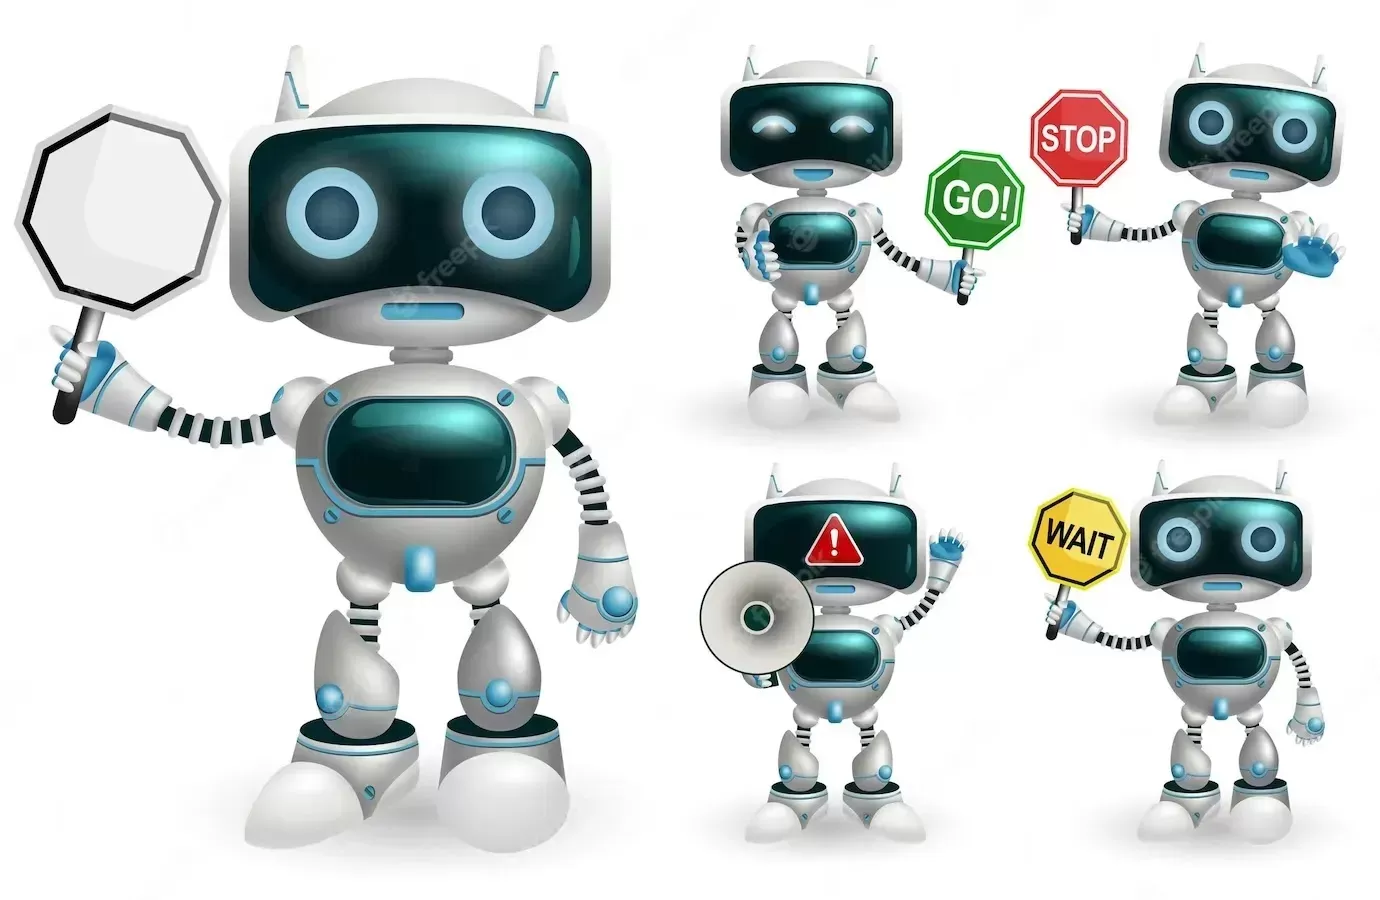 Robot character vector set robotic characters showing signage symbol like go and stop placard